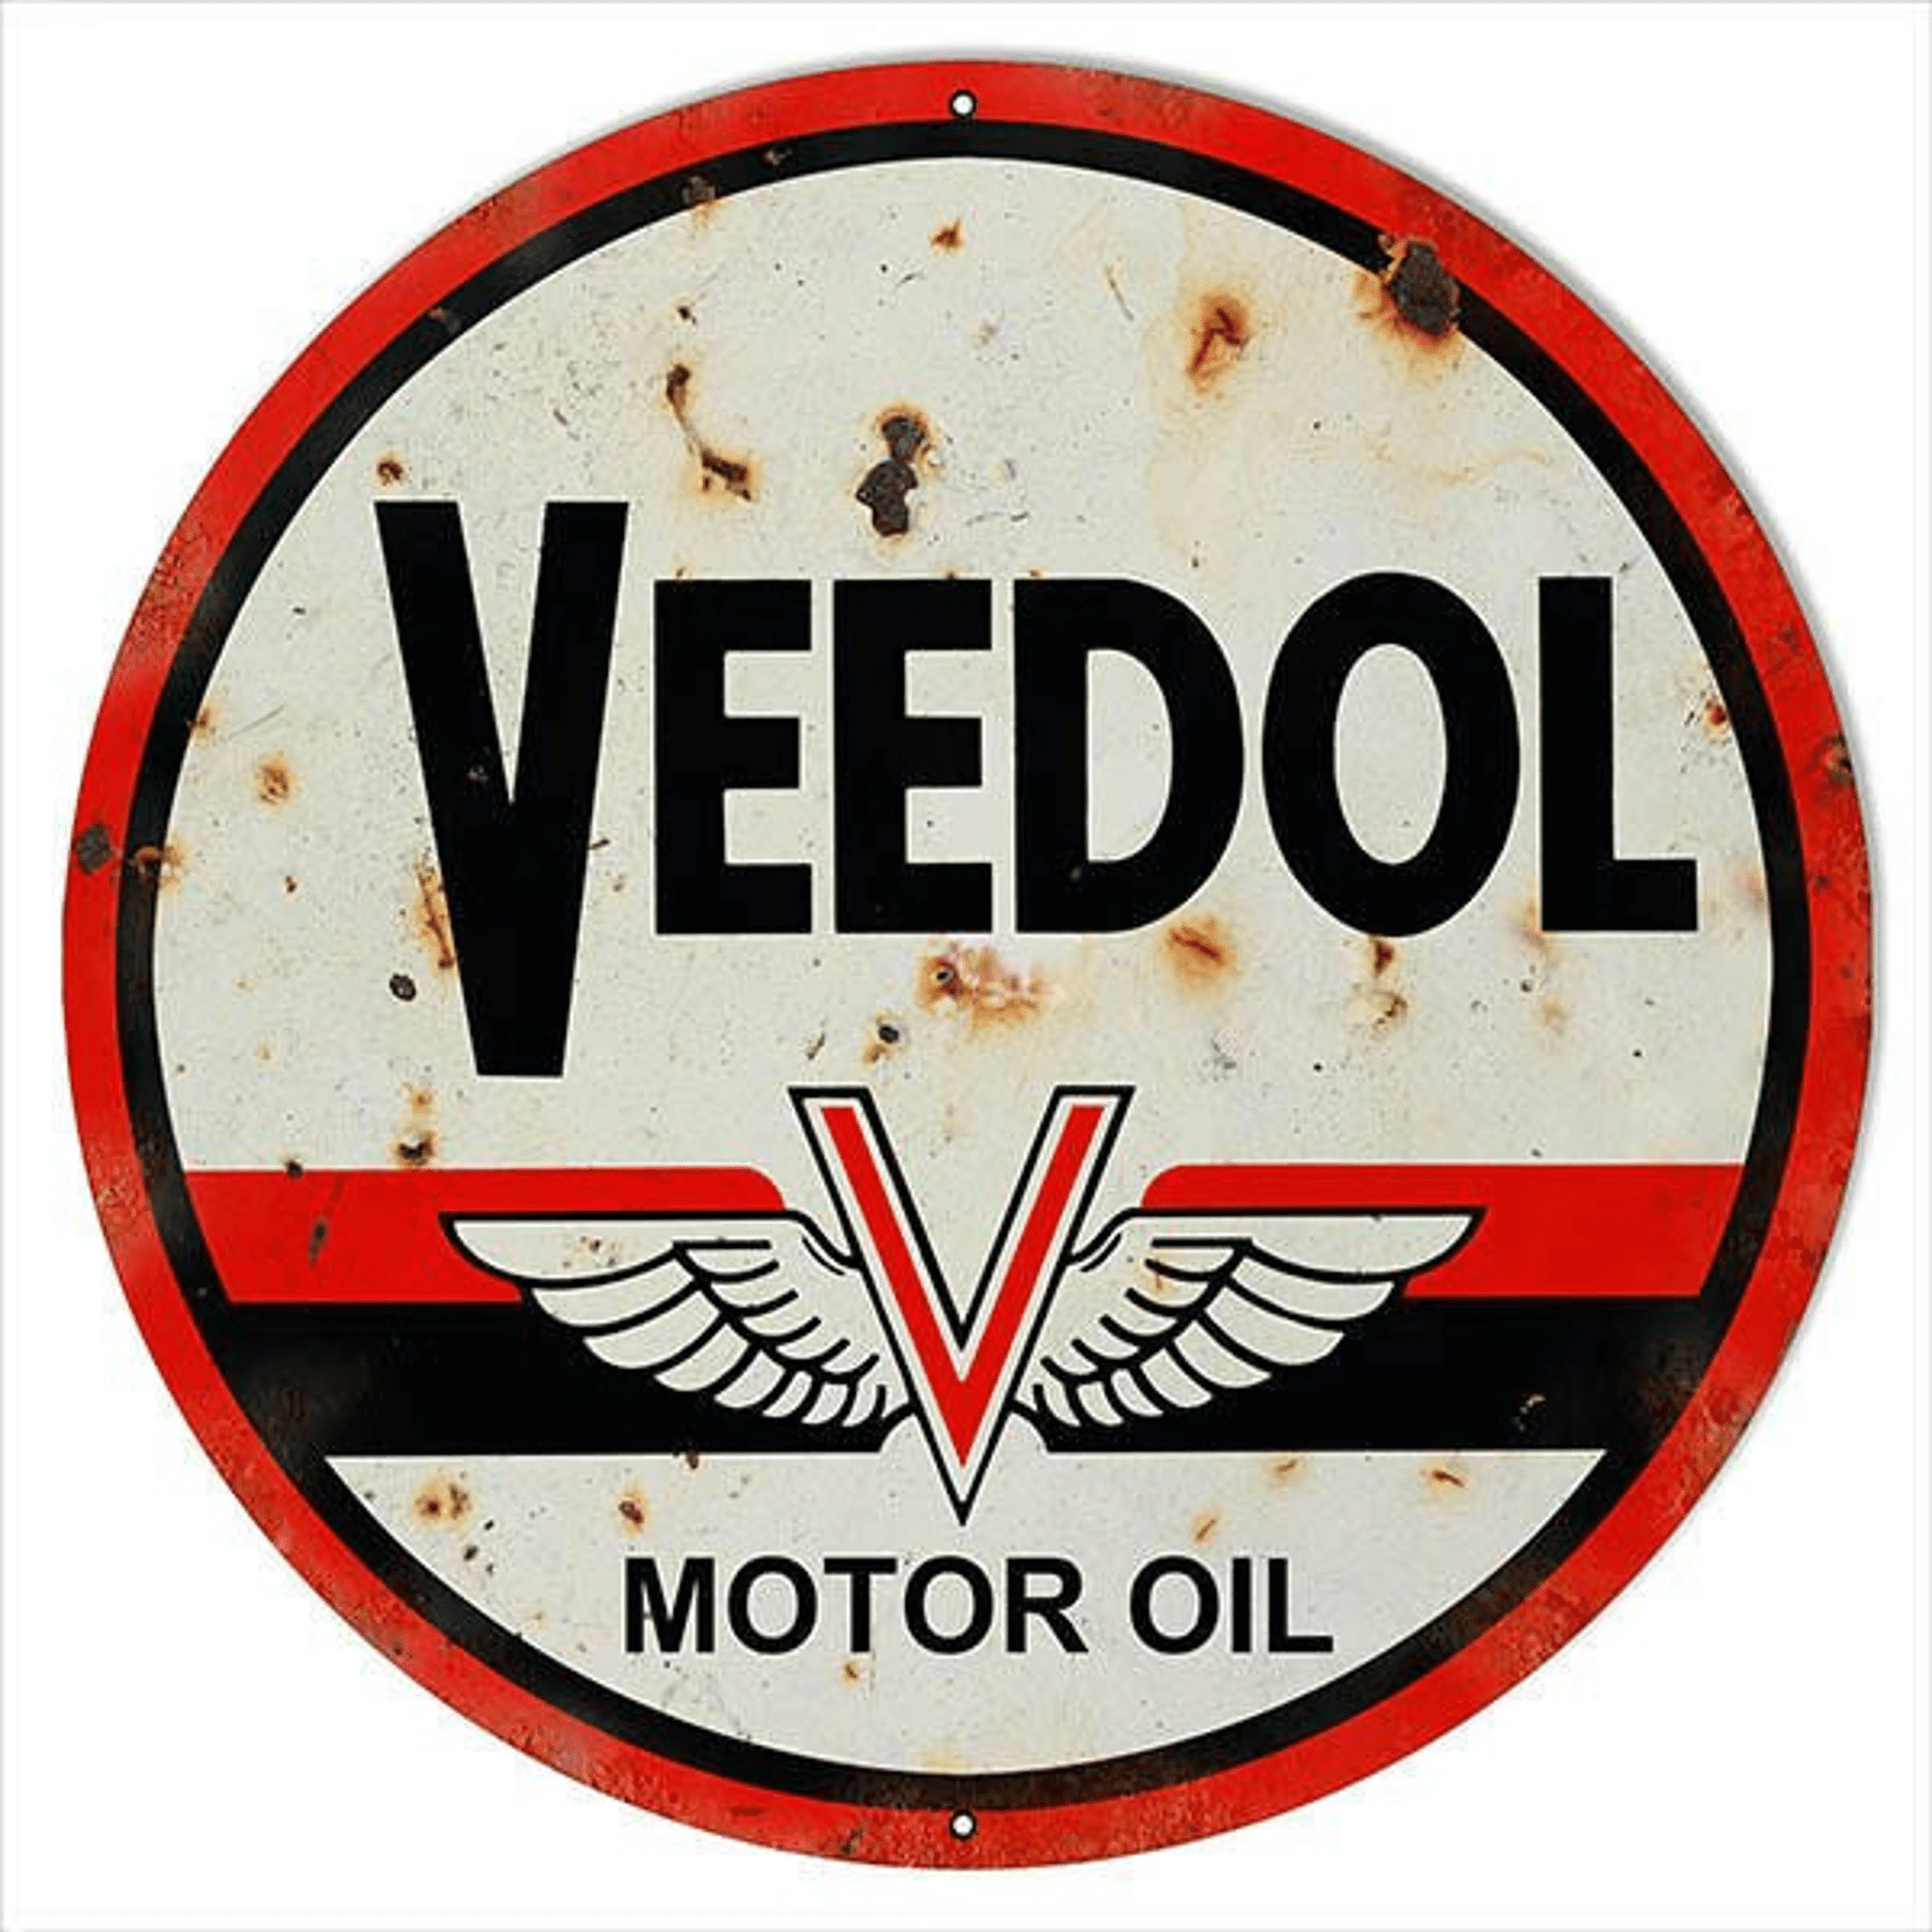 Veedol Motor Oil Sign Vintage Aged Style OR New 22g Metal Sign 4 Sizes Available Vintage Style Retro Garage Art RG